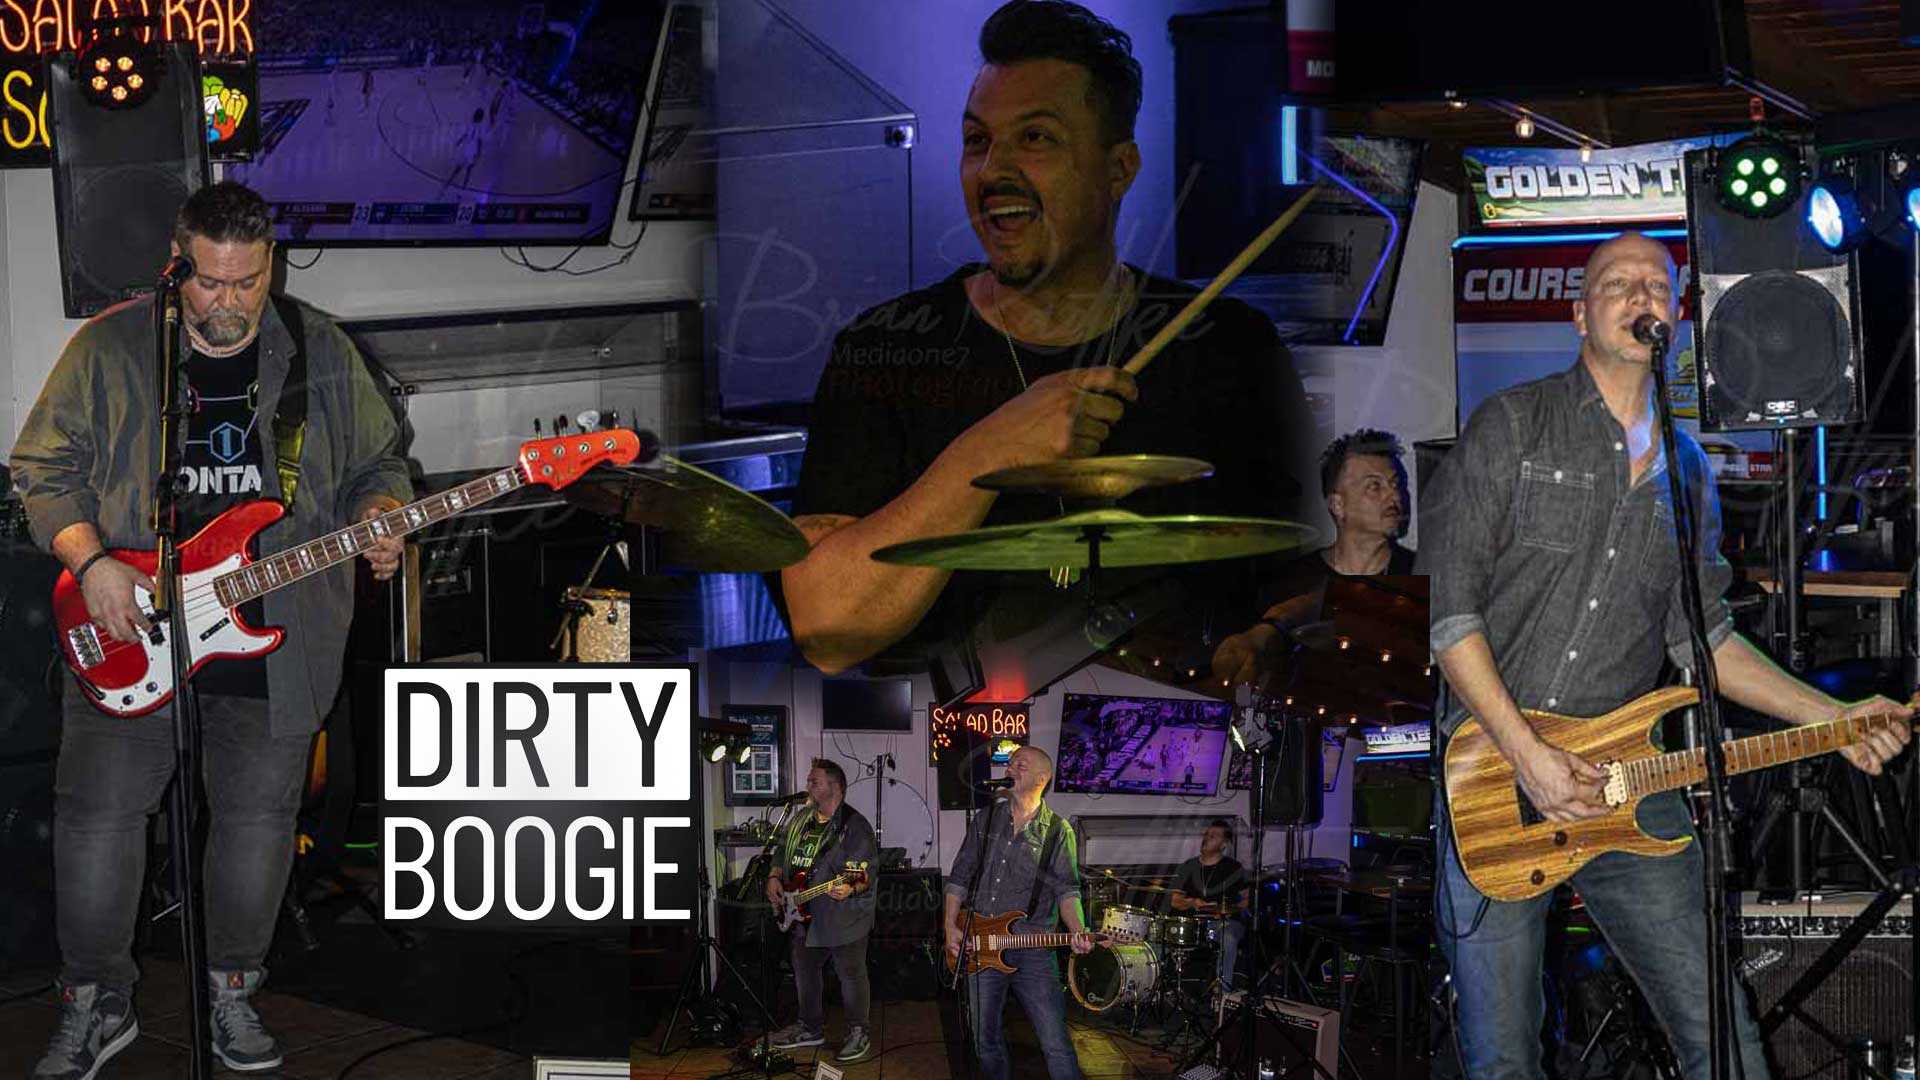 Dirty Boogie Band at Northland Sports Bar and Gril in Appleton Wi